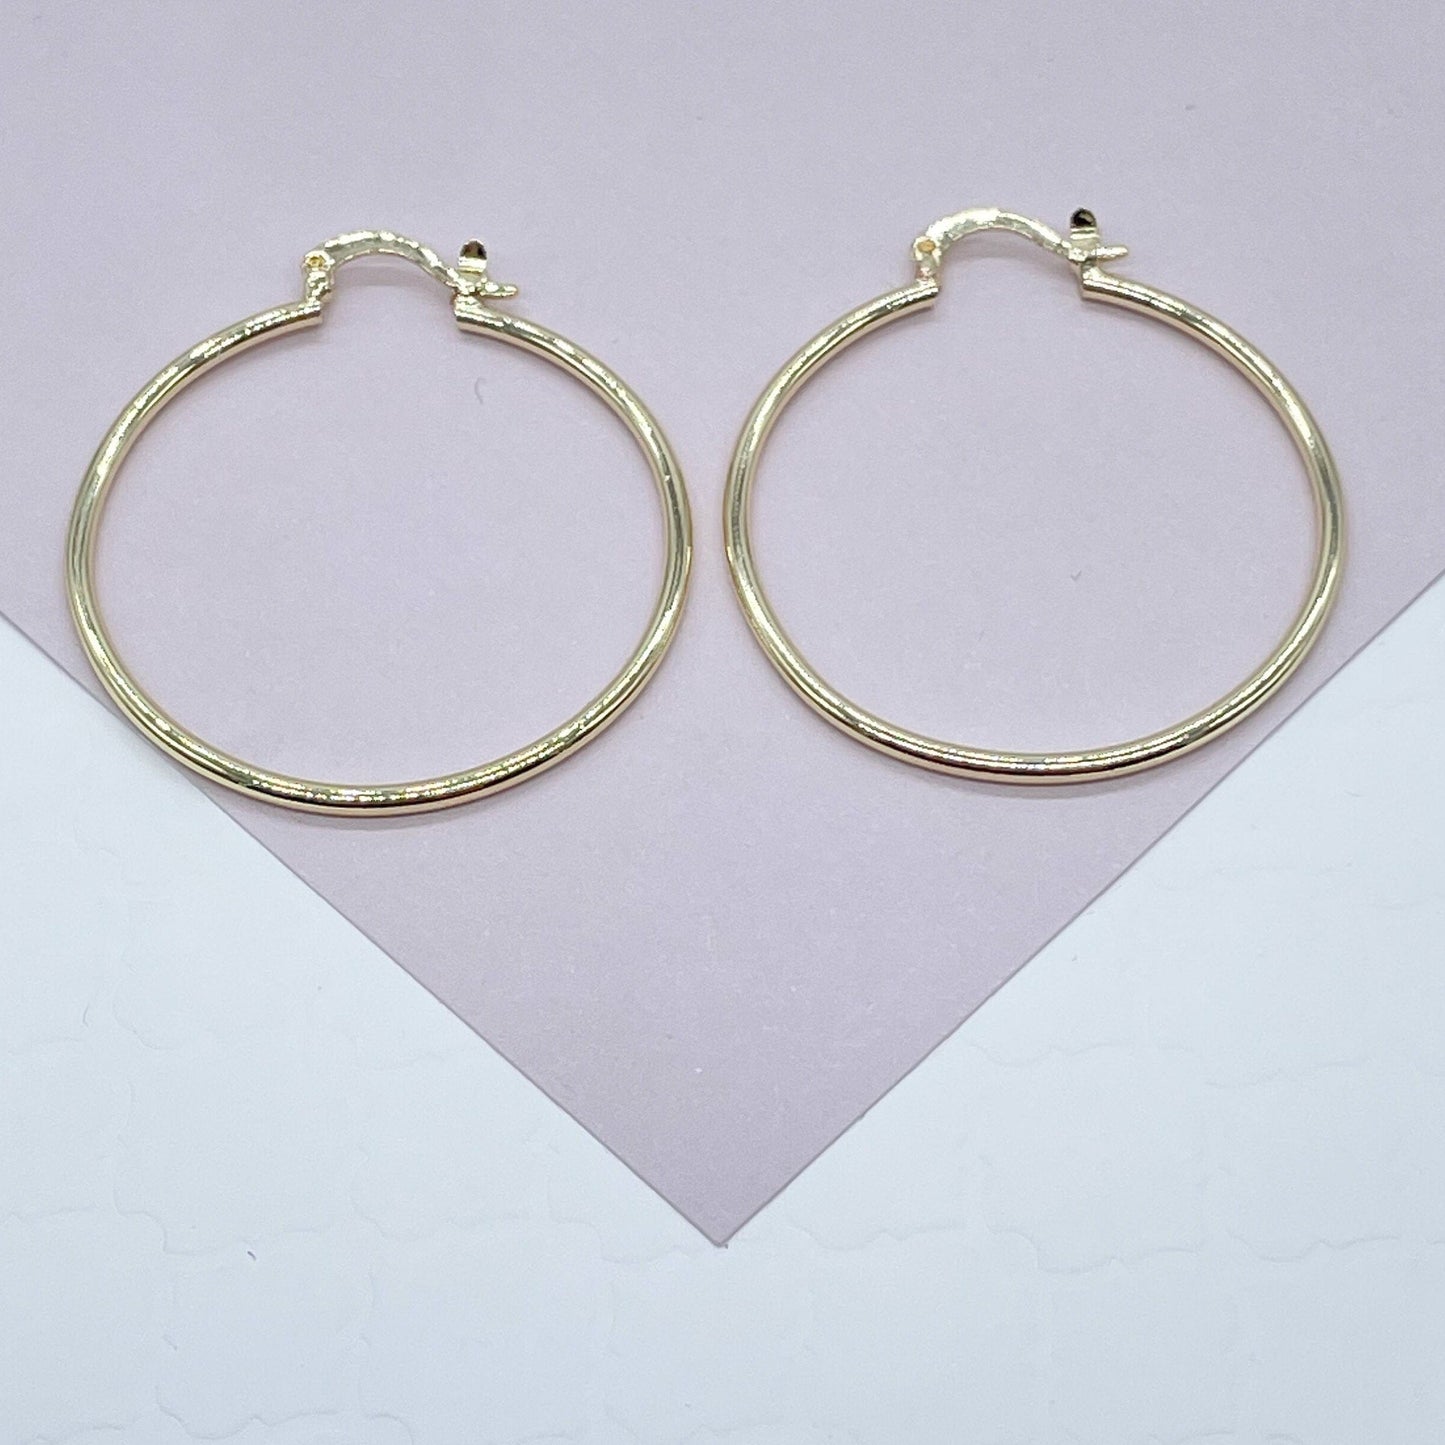 Light 18k Gold Layered Ultra Thin Hoops 1.7mm Thickness In S, M, L Sizes For